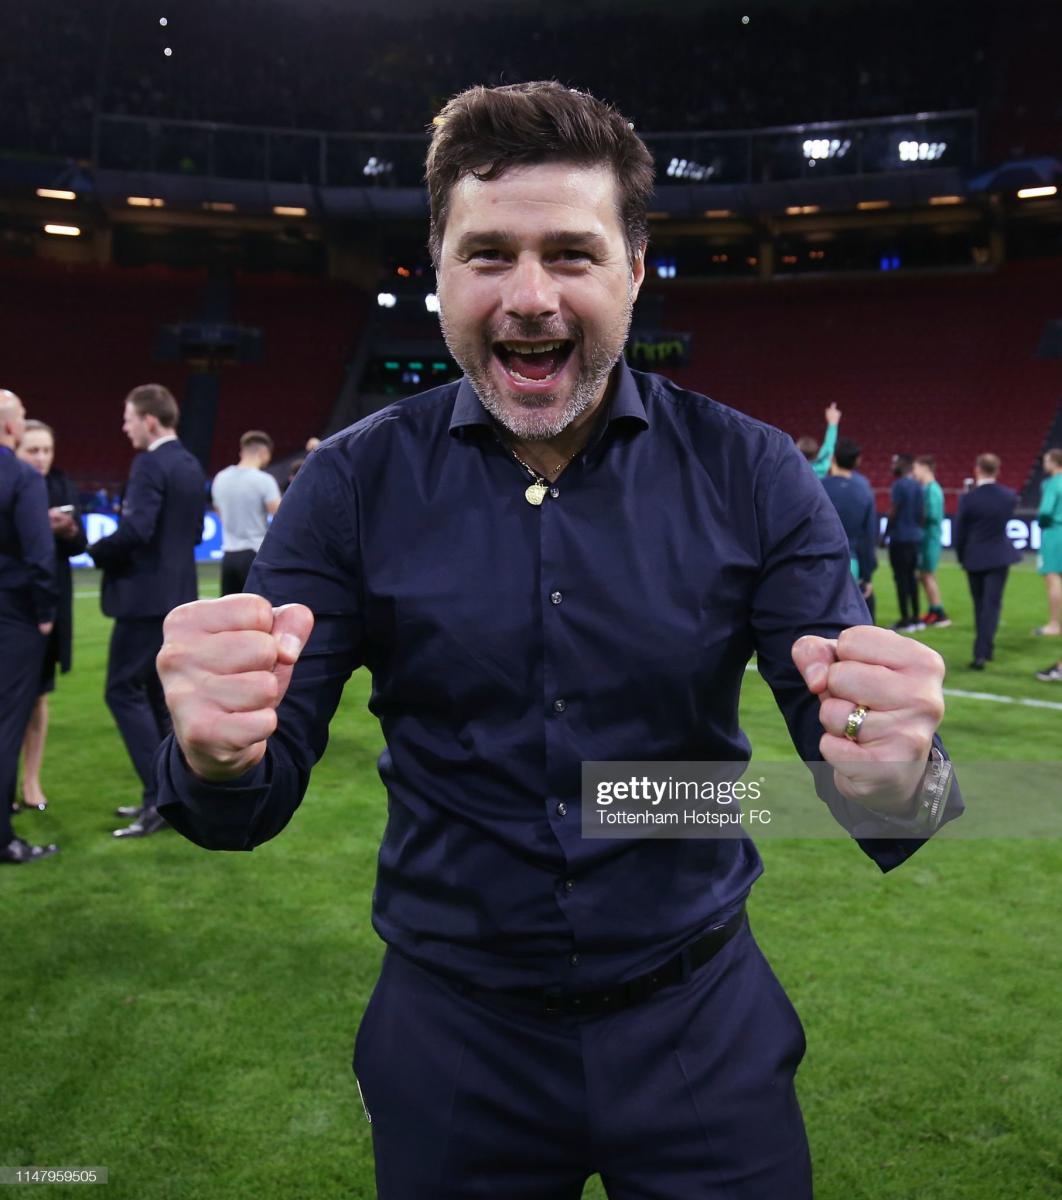 Mauricio Pochettino, Manager of <b><a  data-cke-saved-href='https://www.vavel.com/en/data/tottenham-hotspur' href='https://www.vavel.com/en/data/tottenham-hotspur'>Tottenham Hotspur</a></b> celebrates after the final whistle during the UEFA Champions League Semi Final second leg match between Ajax and <b><a  data-cke-saved-href='https://www.vavel.com/en/data/tottenham-hotspur' href='https://www.vavel.com/en/data/tottenham-hotspur'>Tottenham Hotspur</a></b> at the Johan Cruyff Arena on May 08, 2019 in Amsterdam, Netherlands. (Photo by Tottenham Hotspur FC via Getty Images)